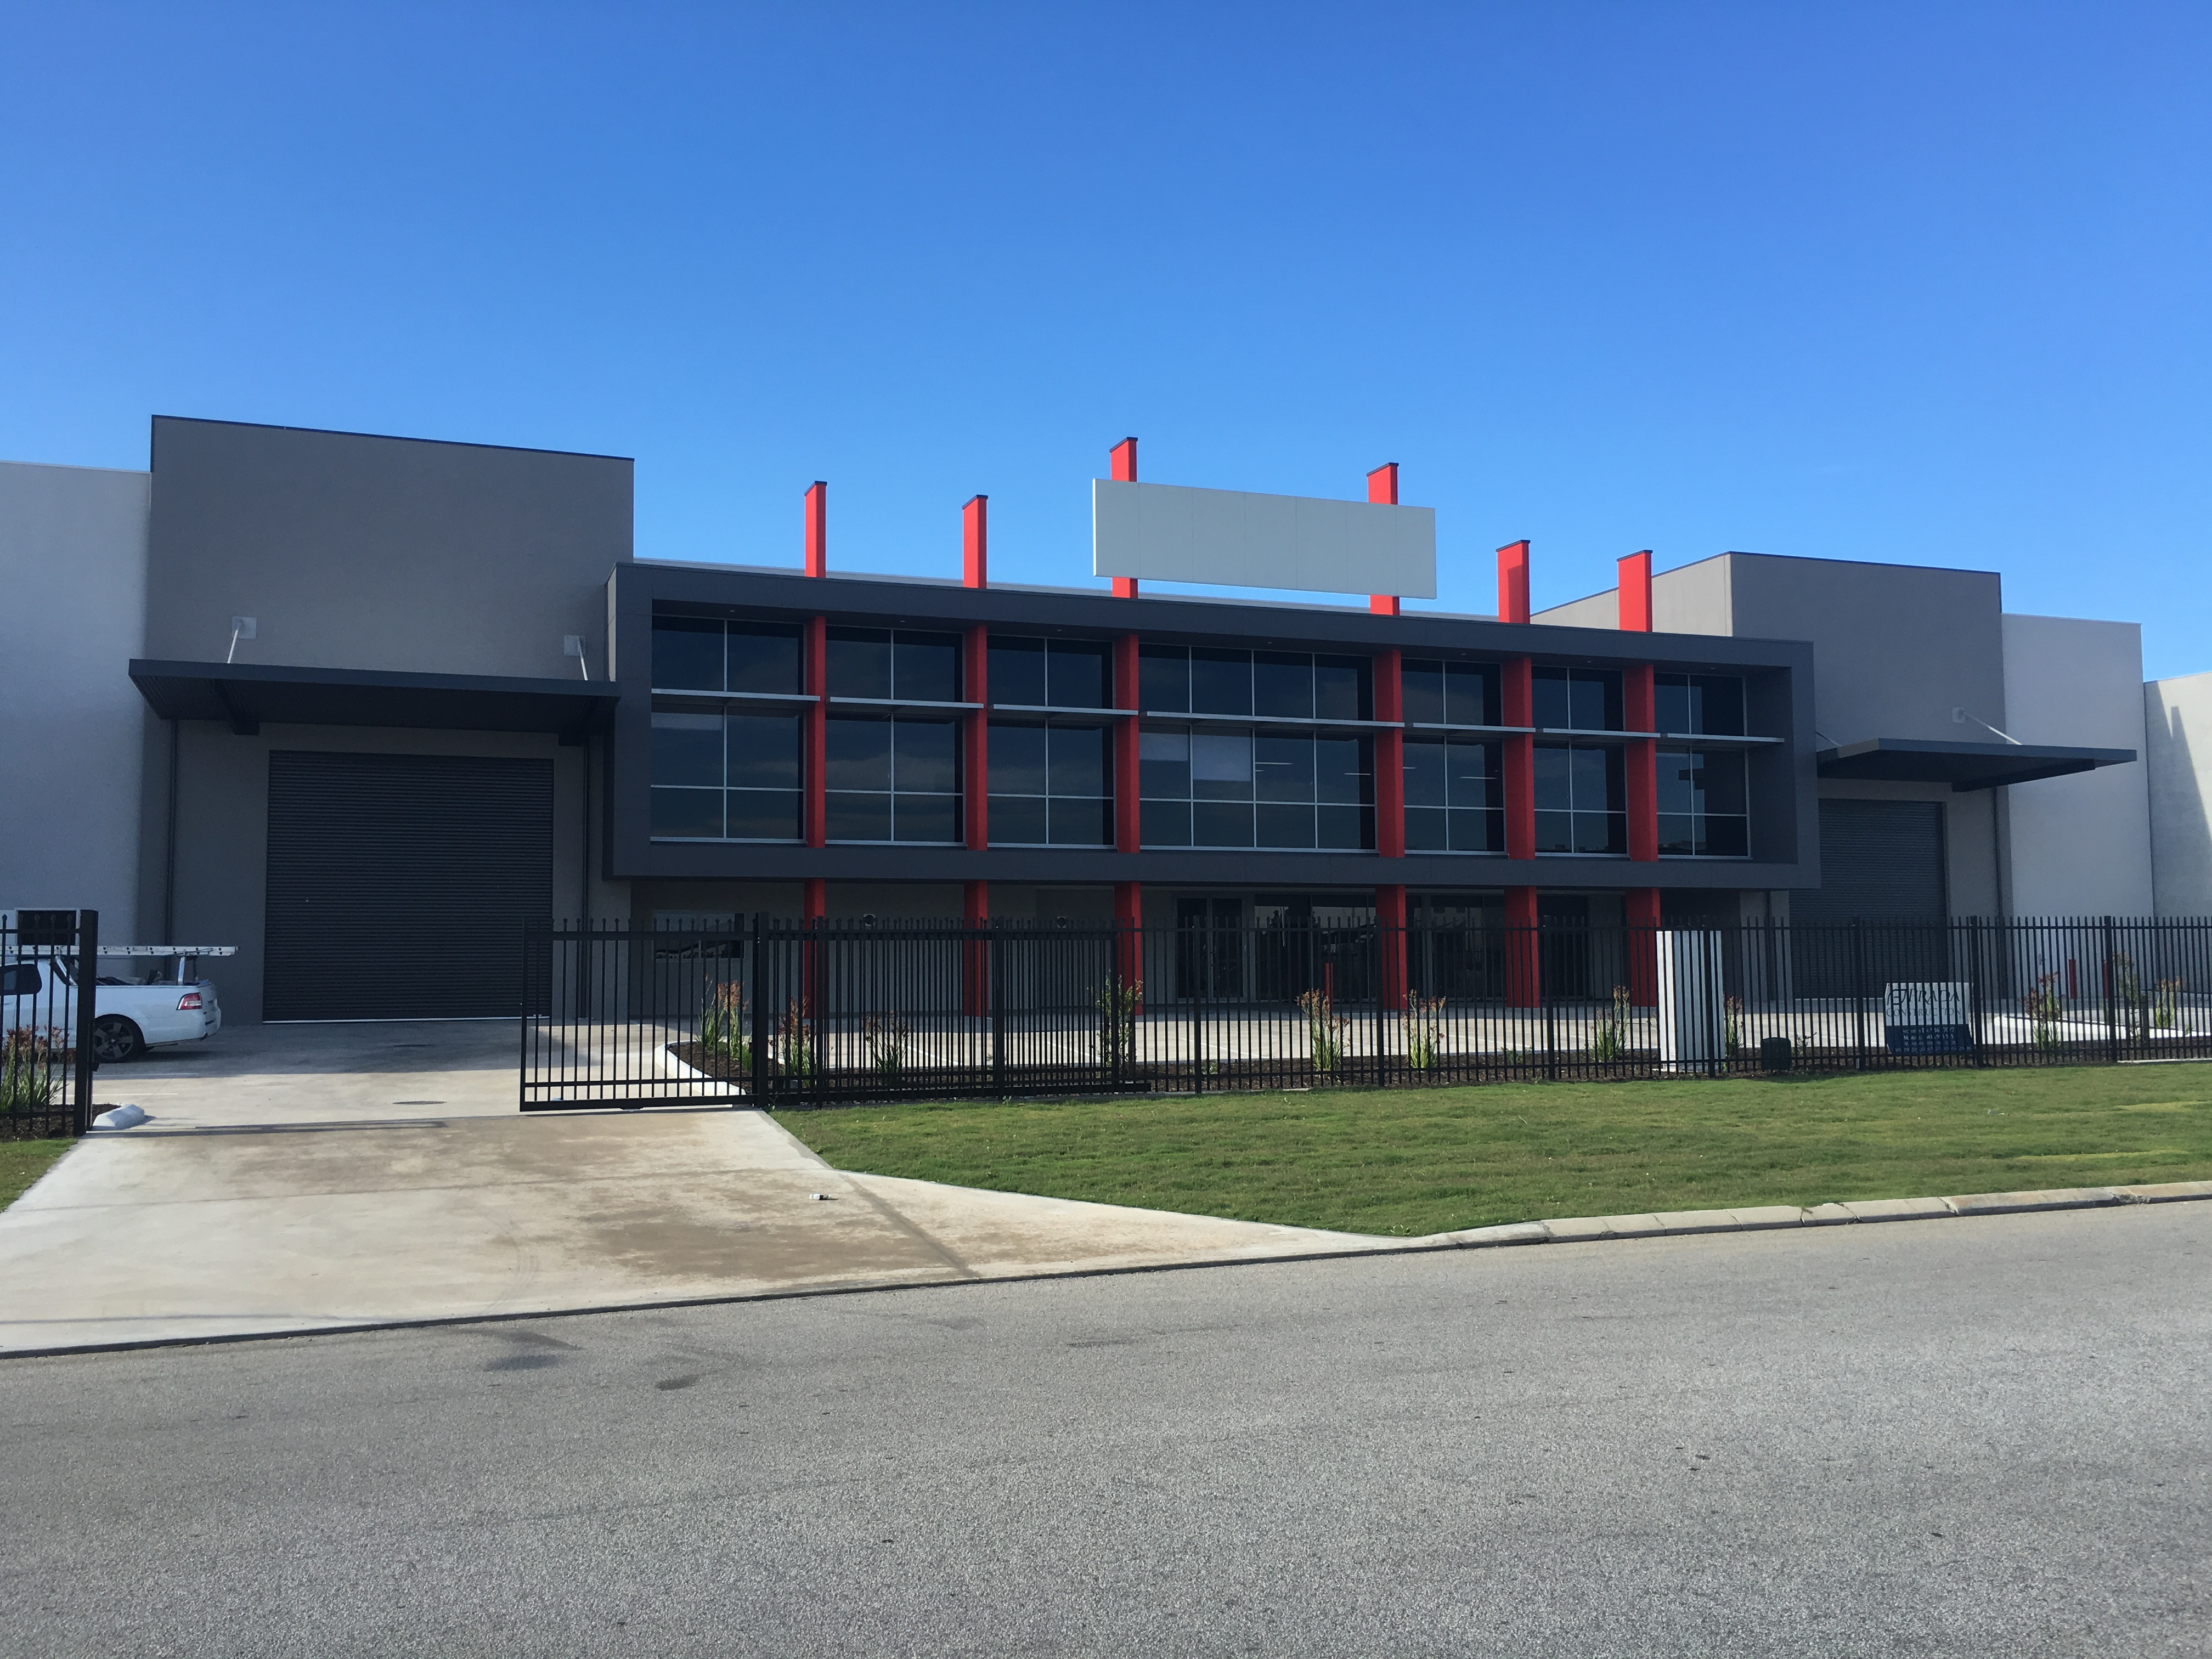 Exterior shot of large commercial office and warehouse complex, finished in dark grey with red accents